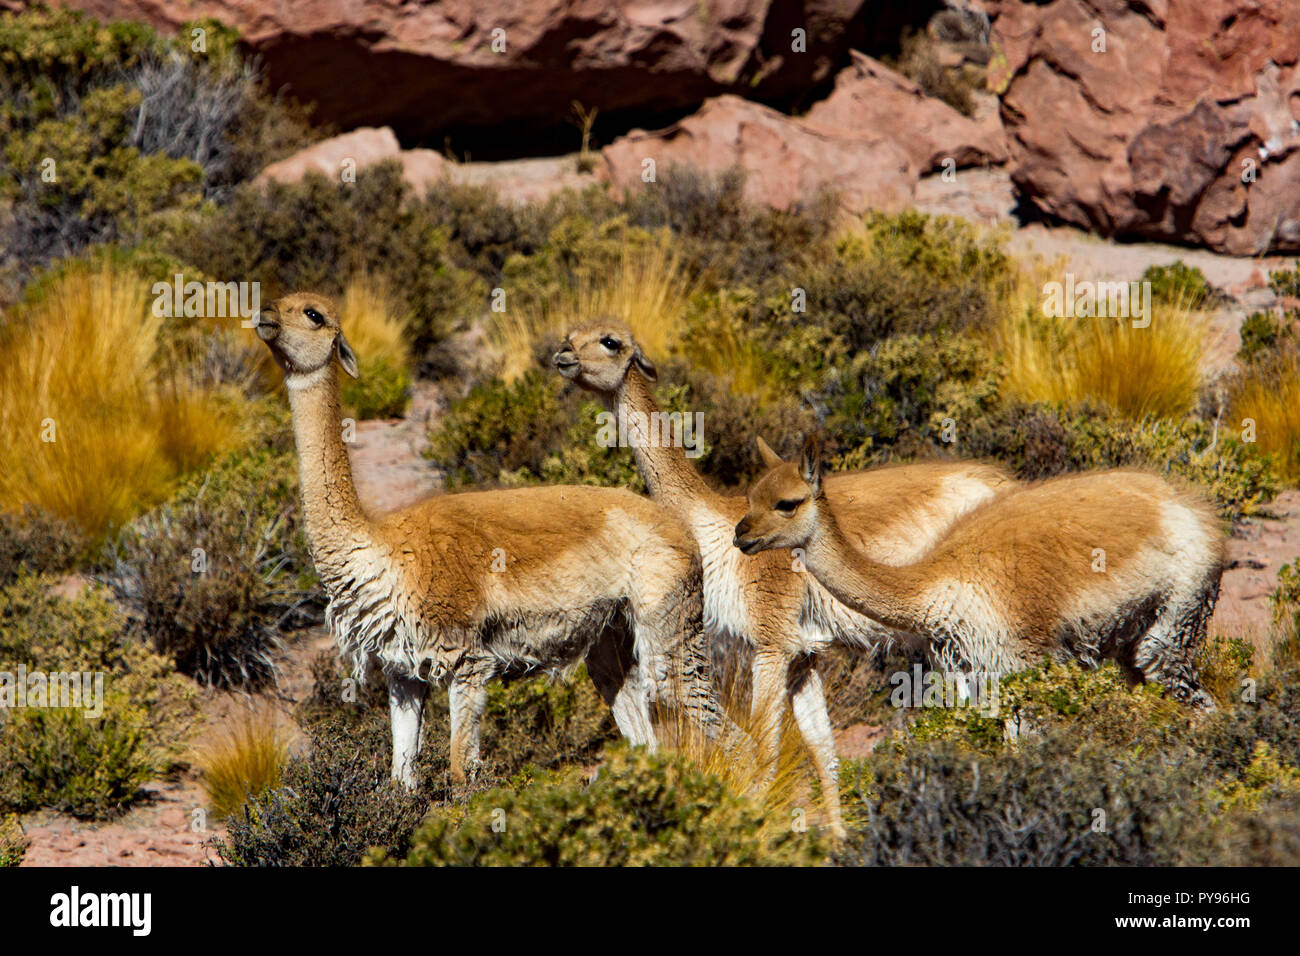 Vicuna, in the same family as the camel, a favorite of nature tourists in the desert near San Pedro de Atacama, Chile, South America Stock Photo